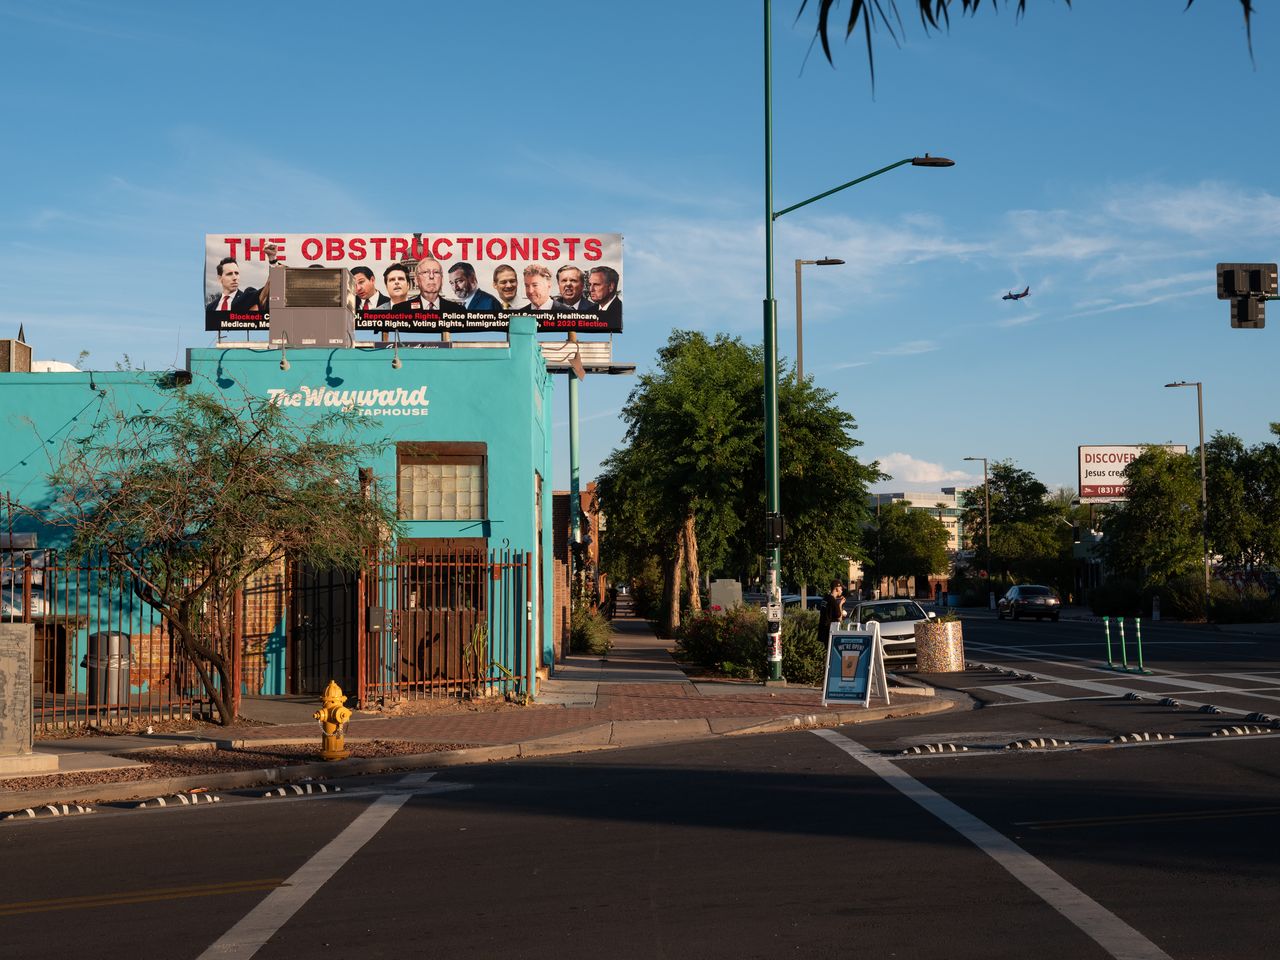 A billboard depicting radical conservative members of Congress as “The Obstructionists” towers over a street in Phoenix.